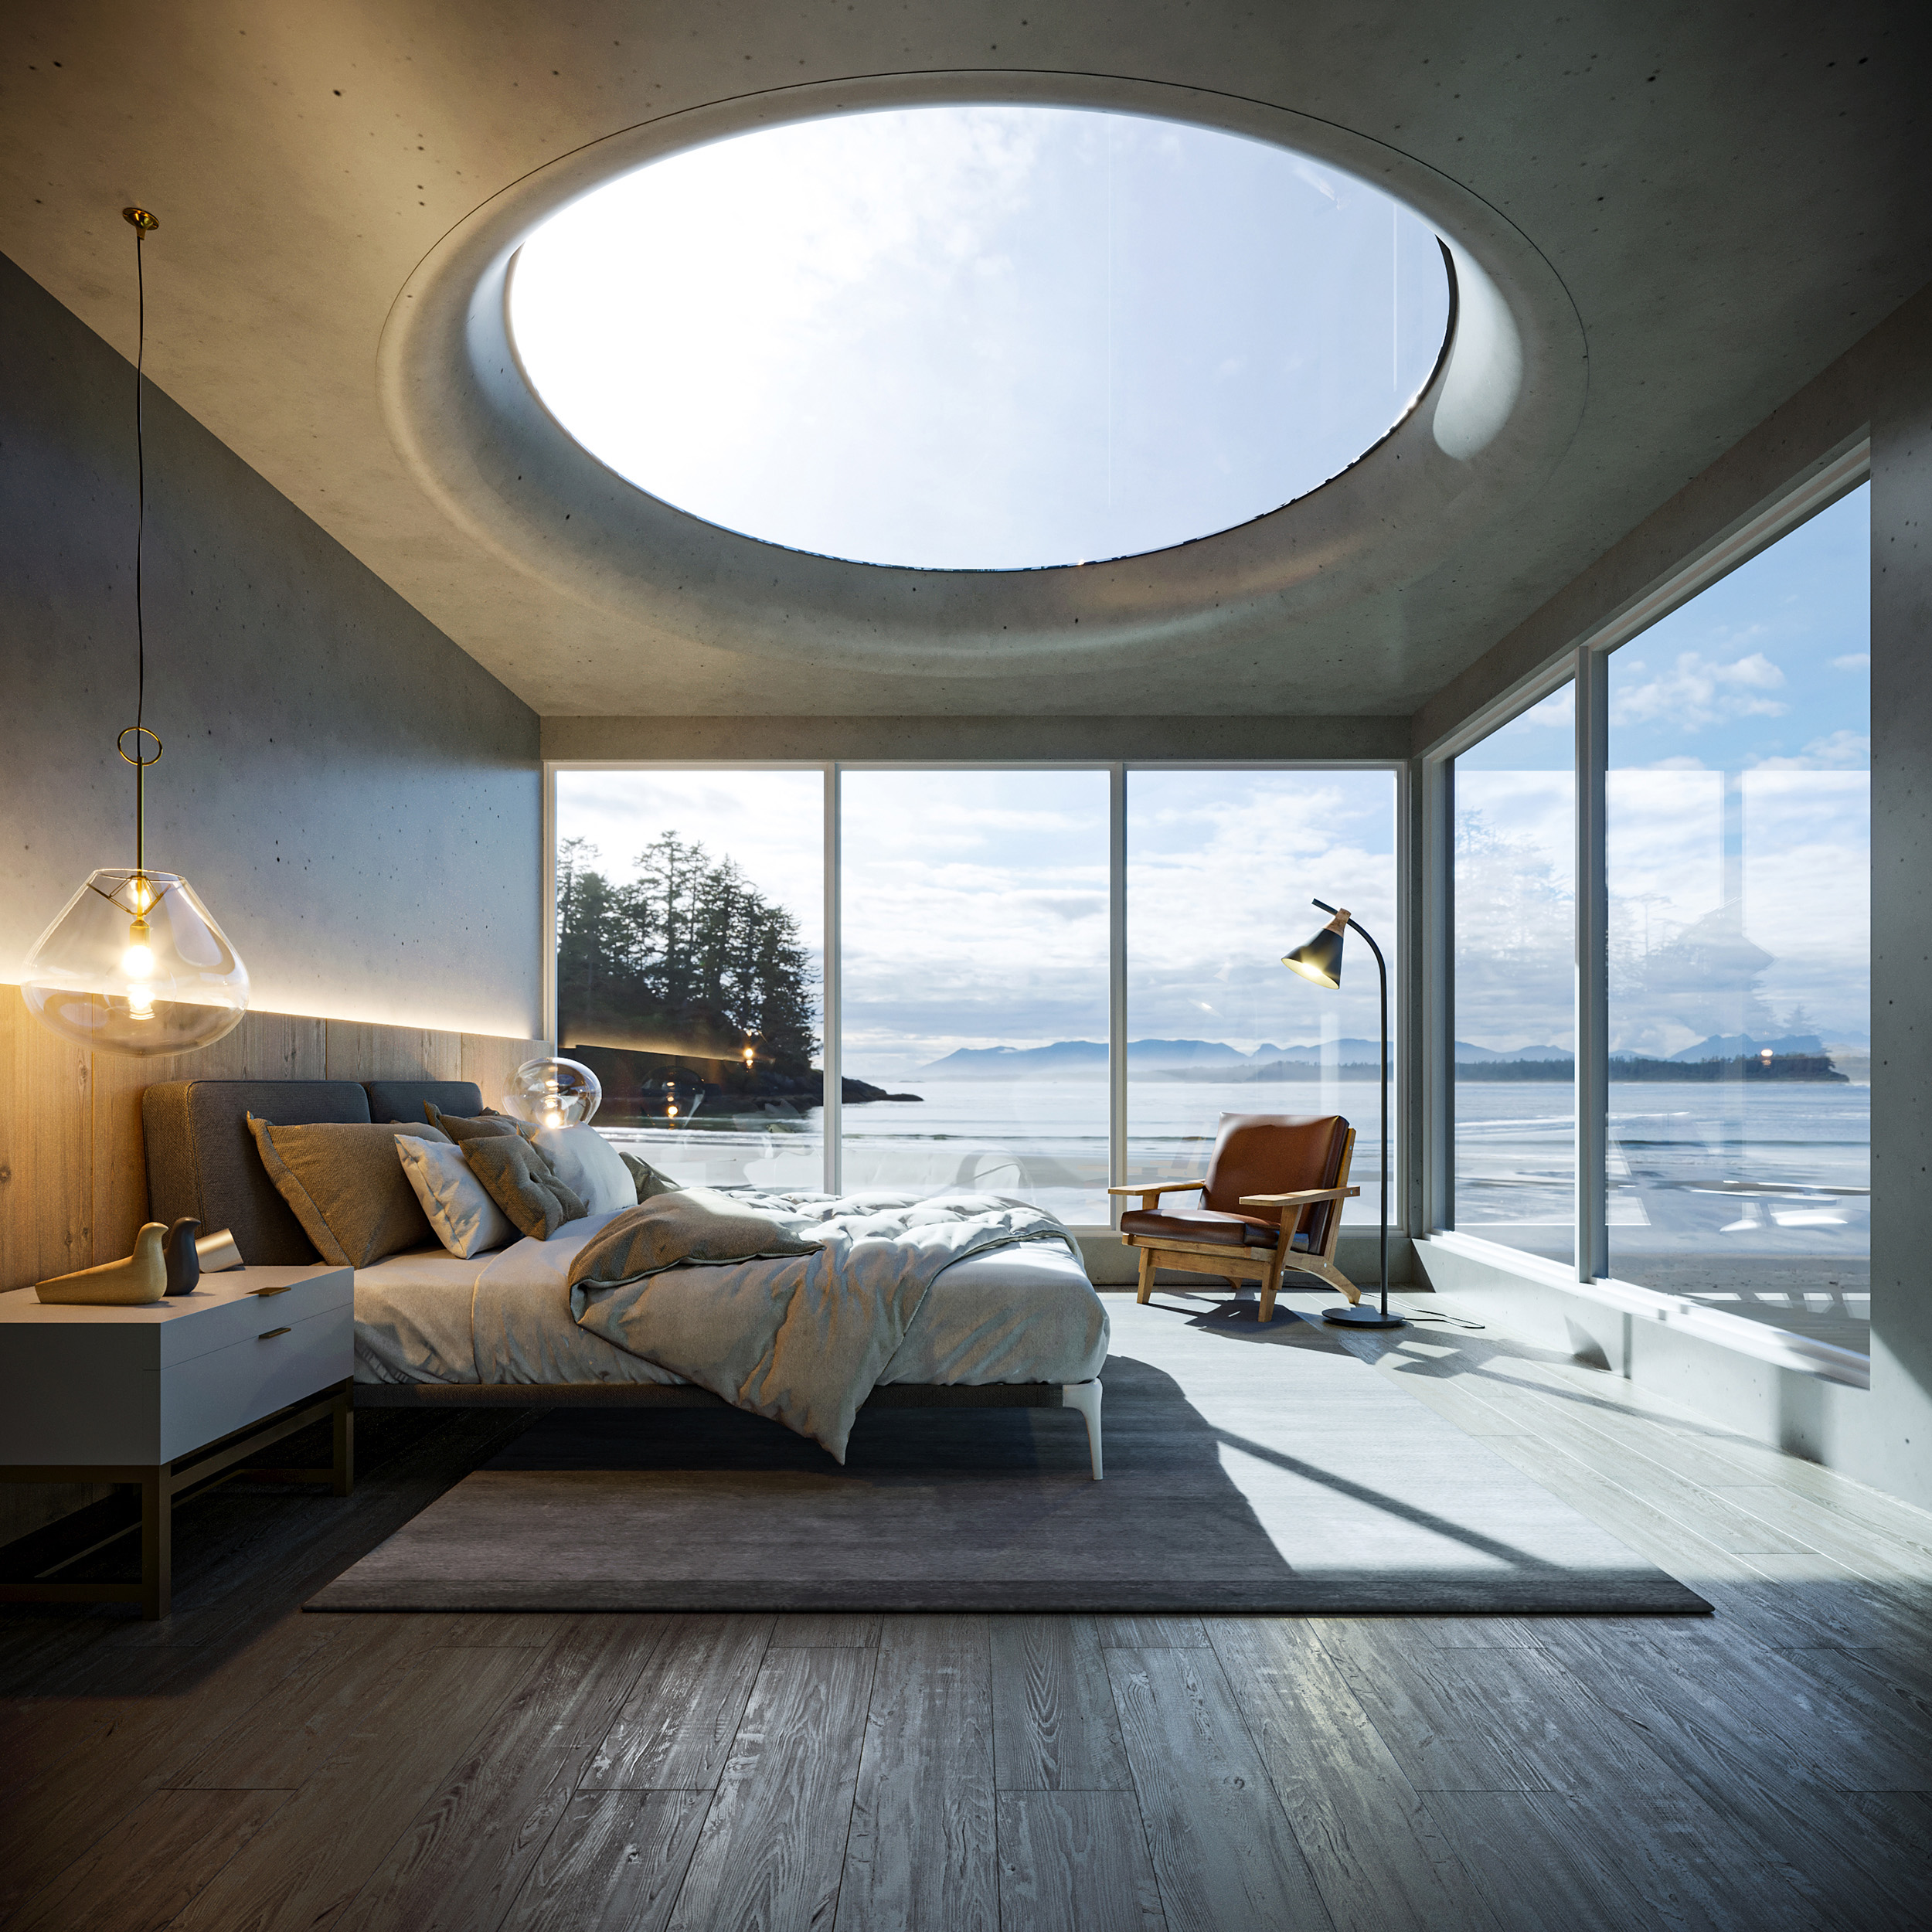 Personal work – Bedroom with lake view